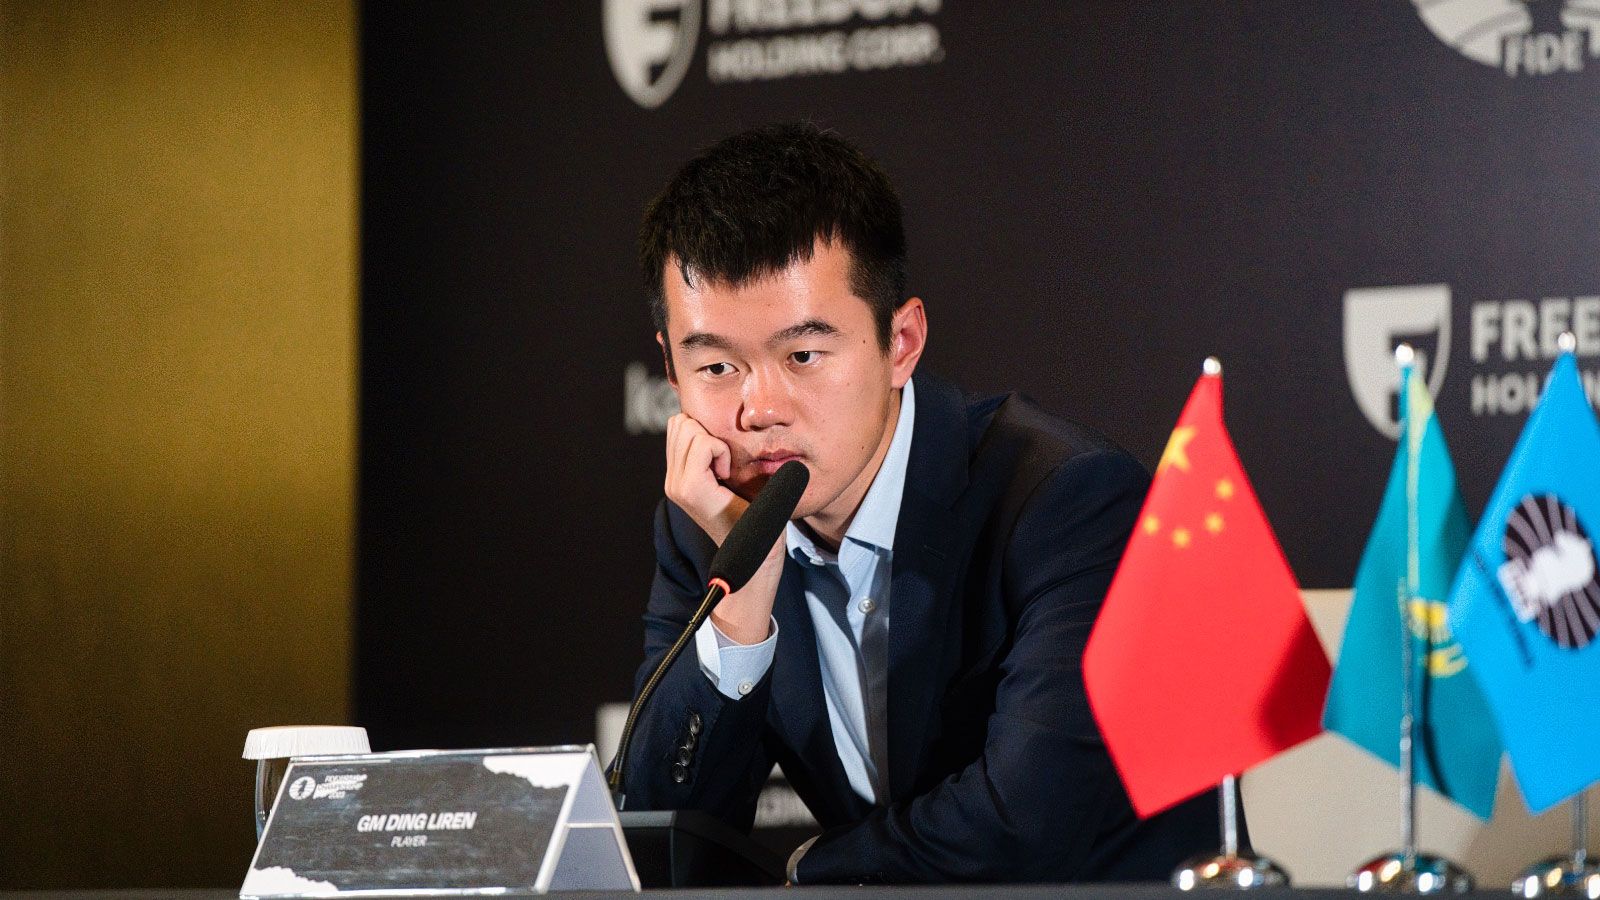 Ding Liren blunders despite edge as Nepomniachtchi regains world chess  championship lead at midpoint